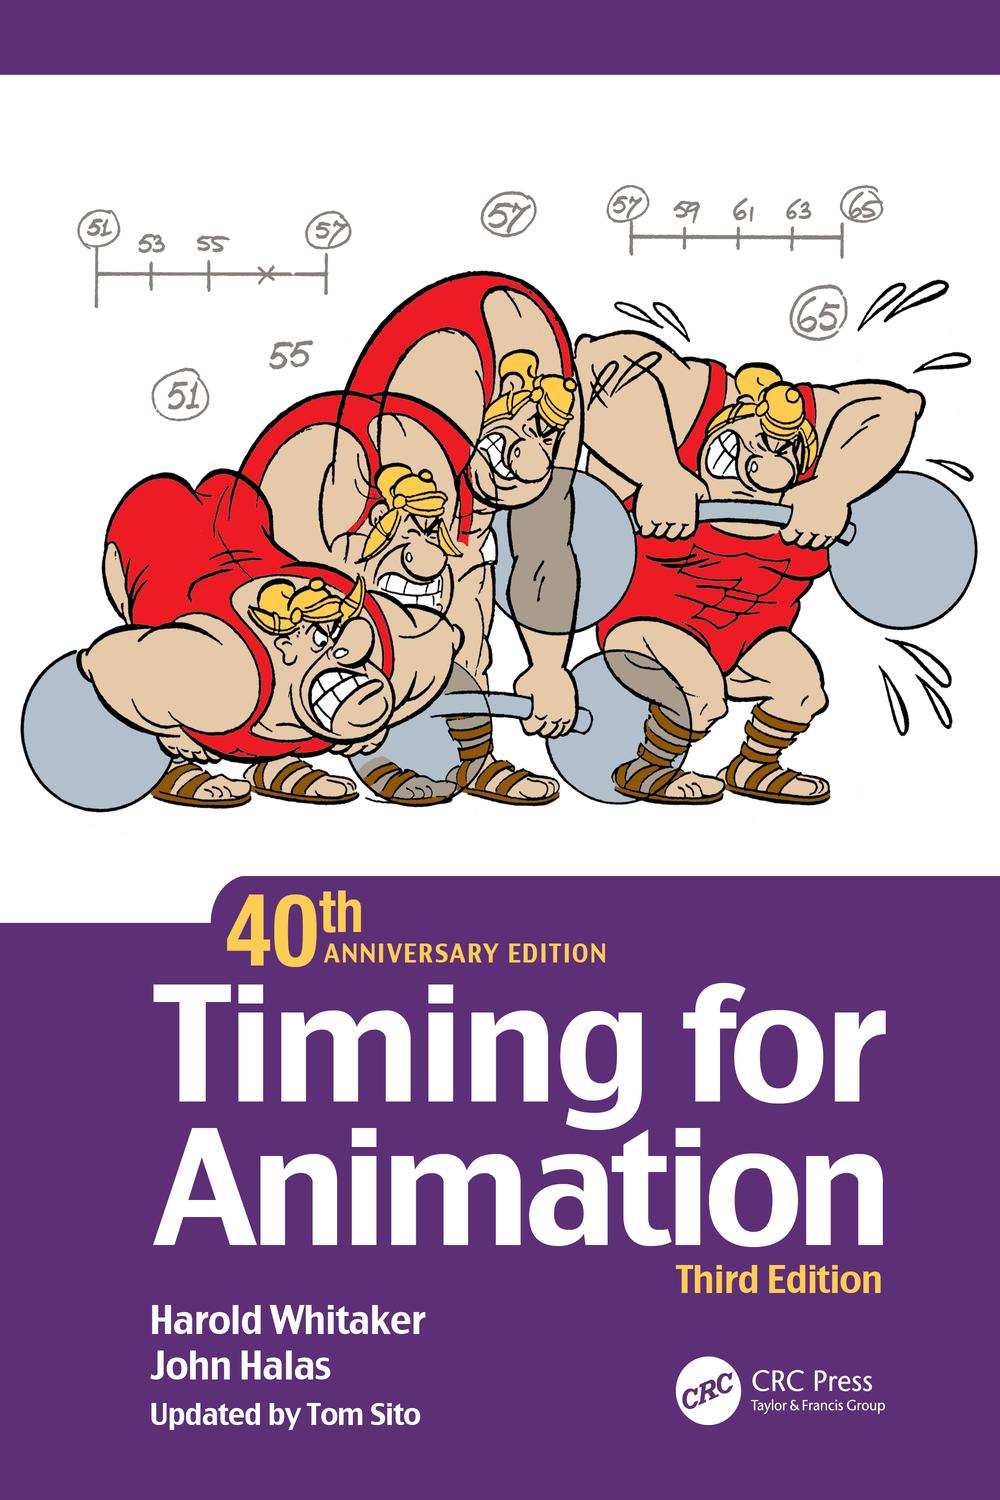 PDF] Timing for Animation, 40th Anniversary Edition by Harold Whitaker  eBook | Perlego